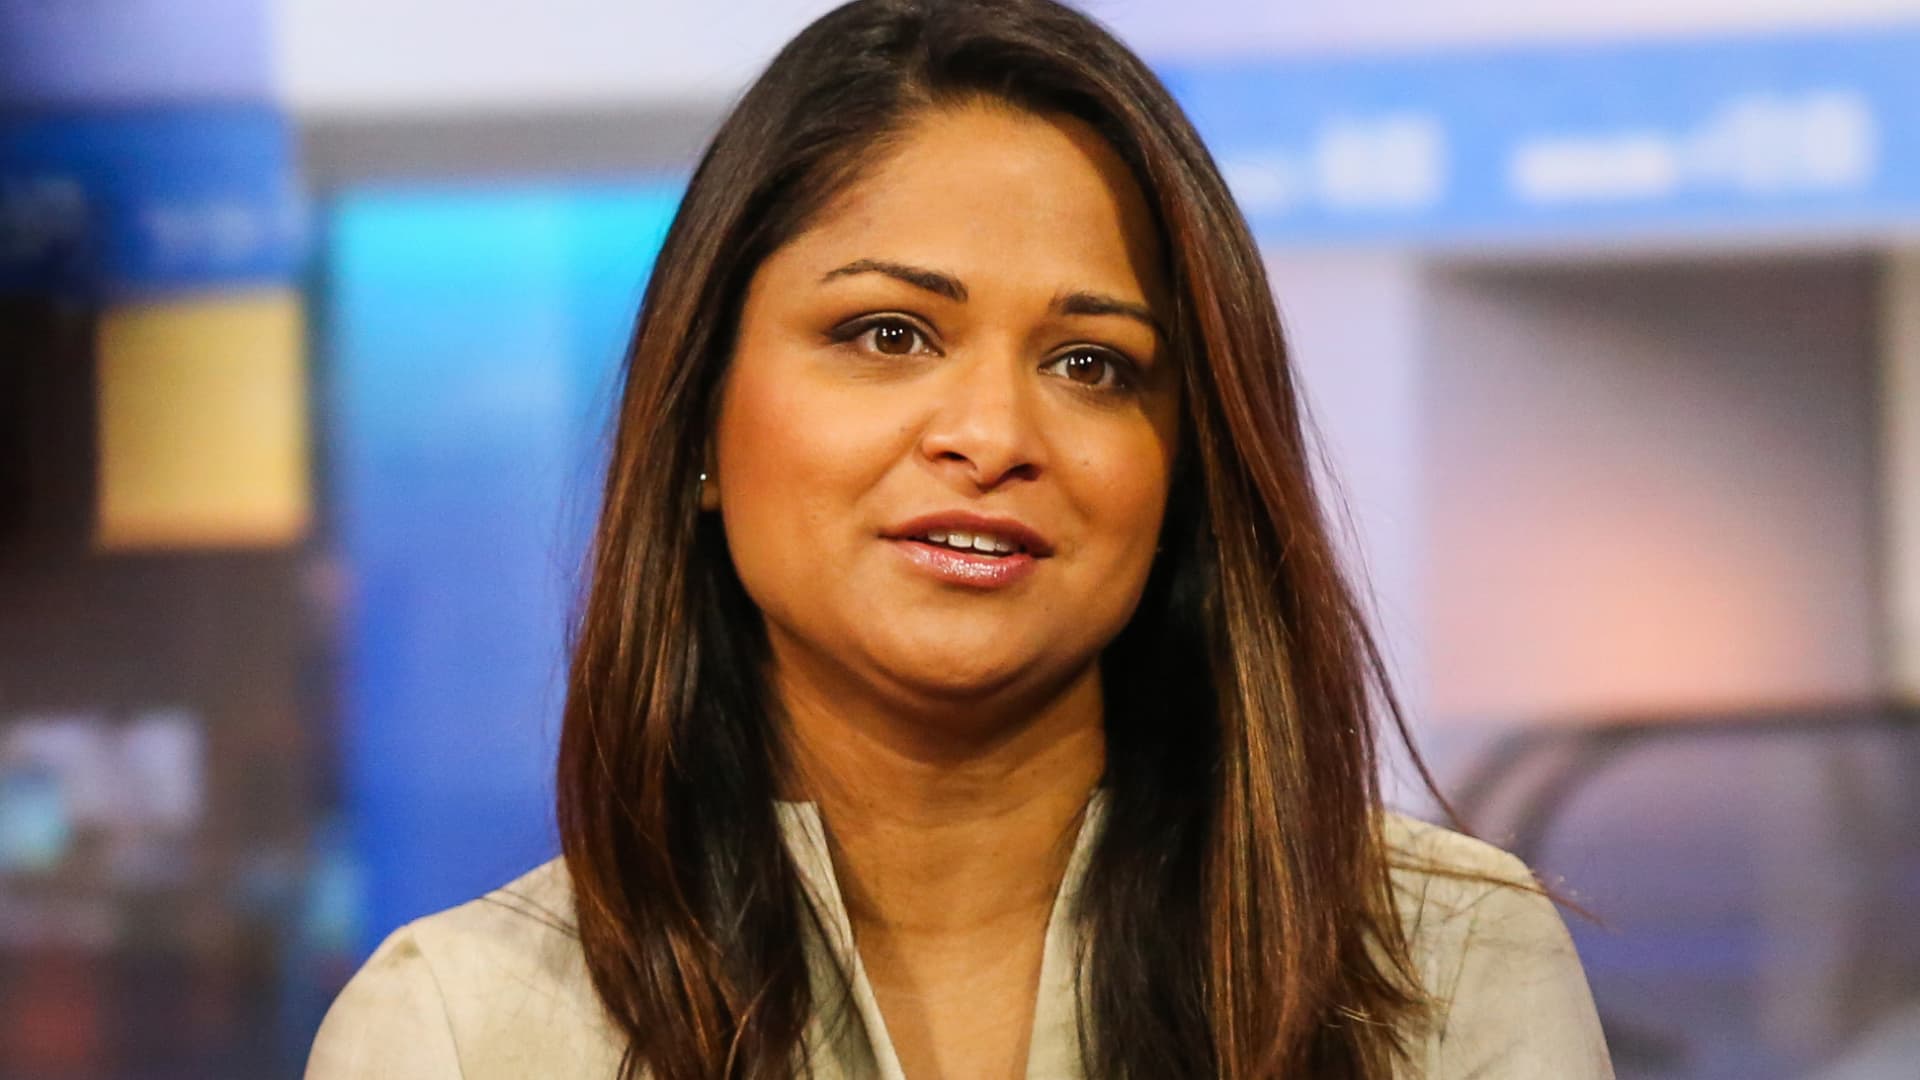 BofA’s Savita Subramanian says theres opportunity in this corner of the market [Video]